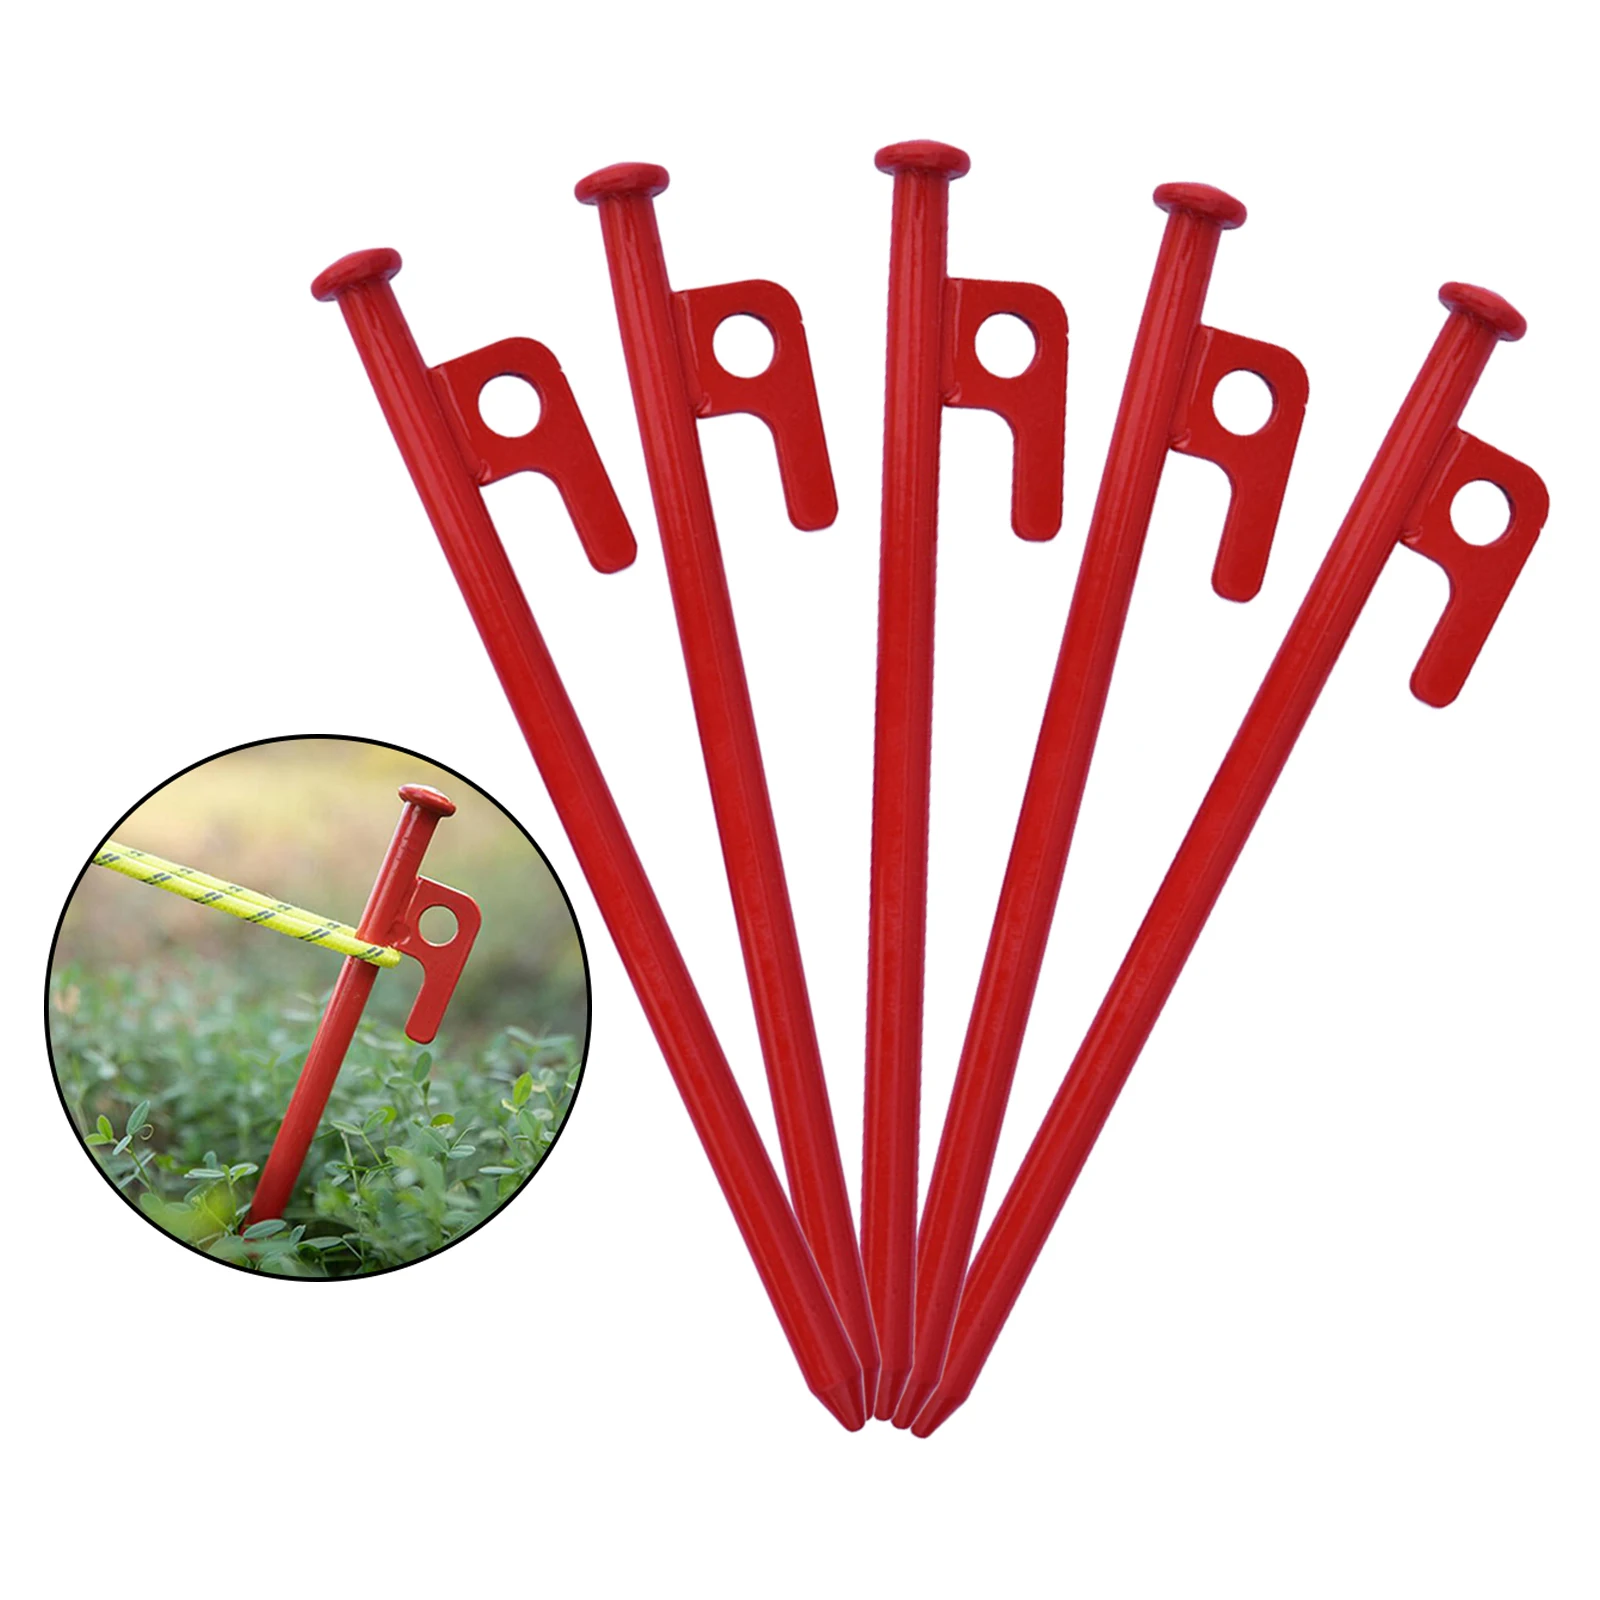 5pcs Tent Nails Stakes Camping Pegs Steel Tent Pegs Beach Garden Accessories